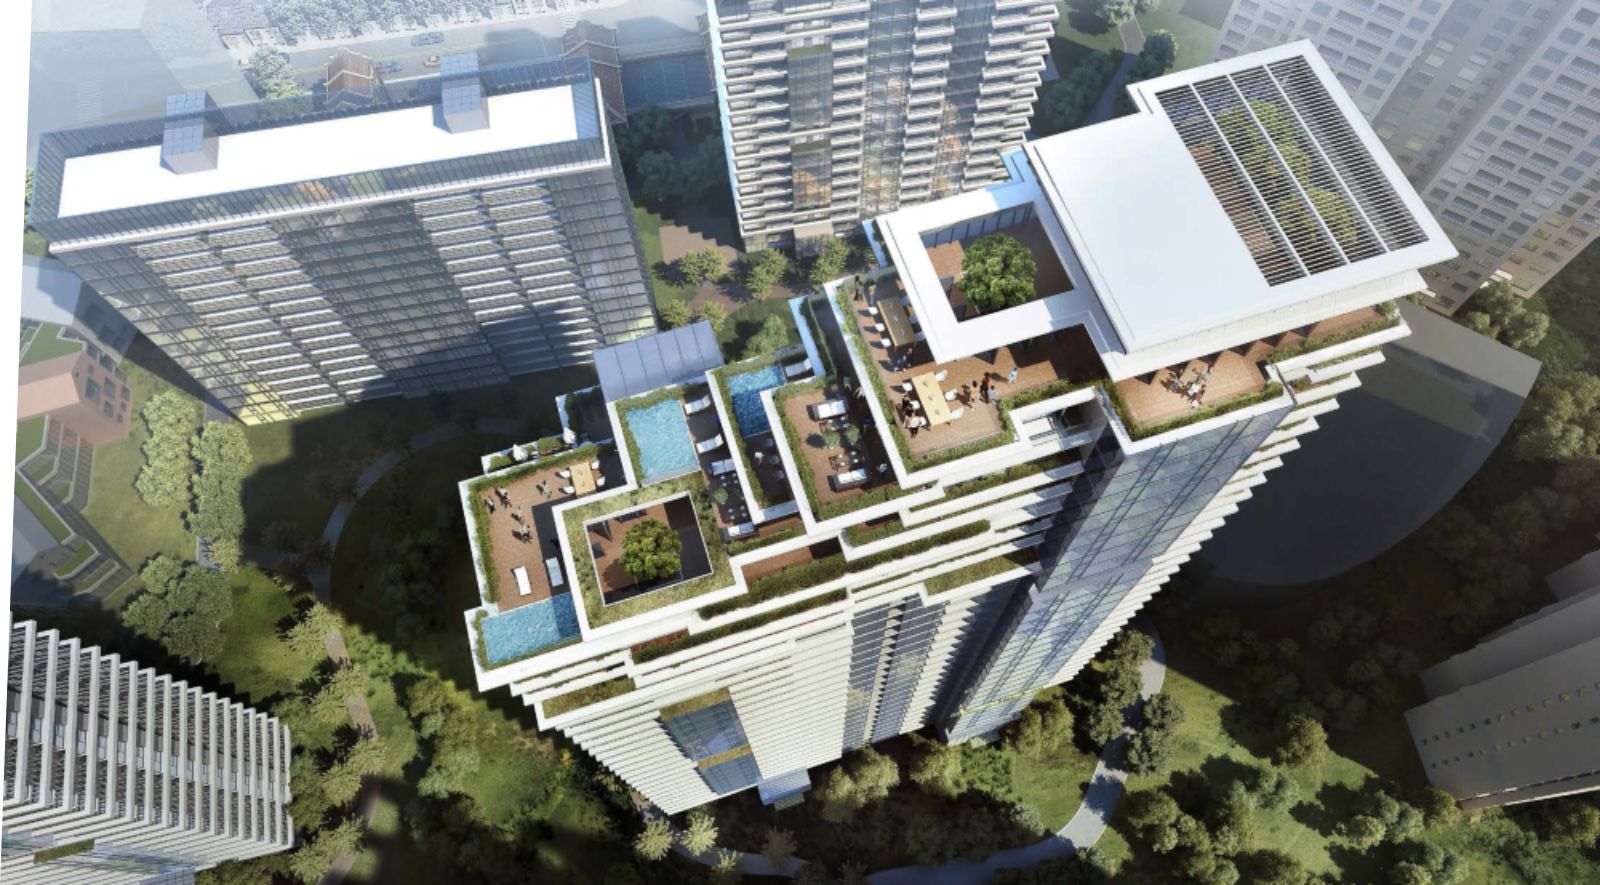 Citic Pacific Residence Phase II